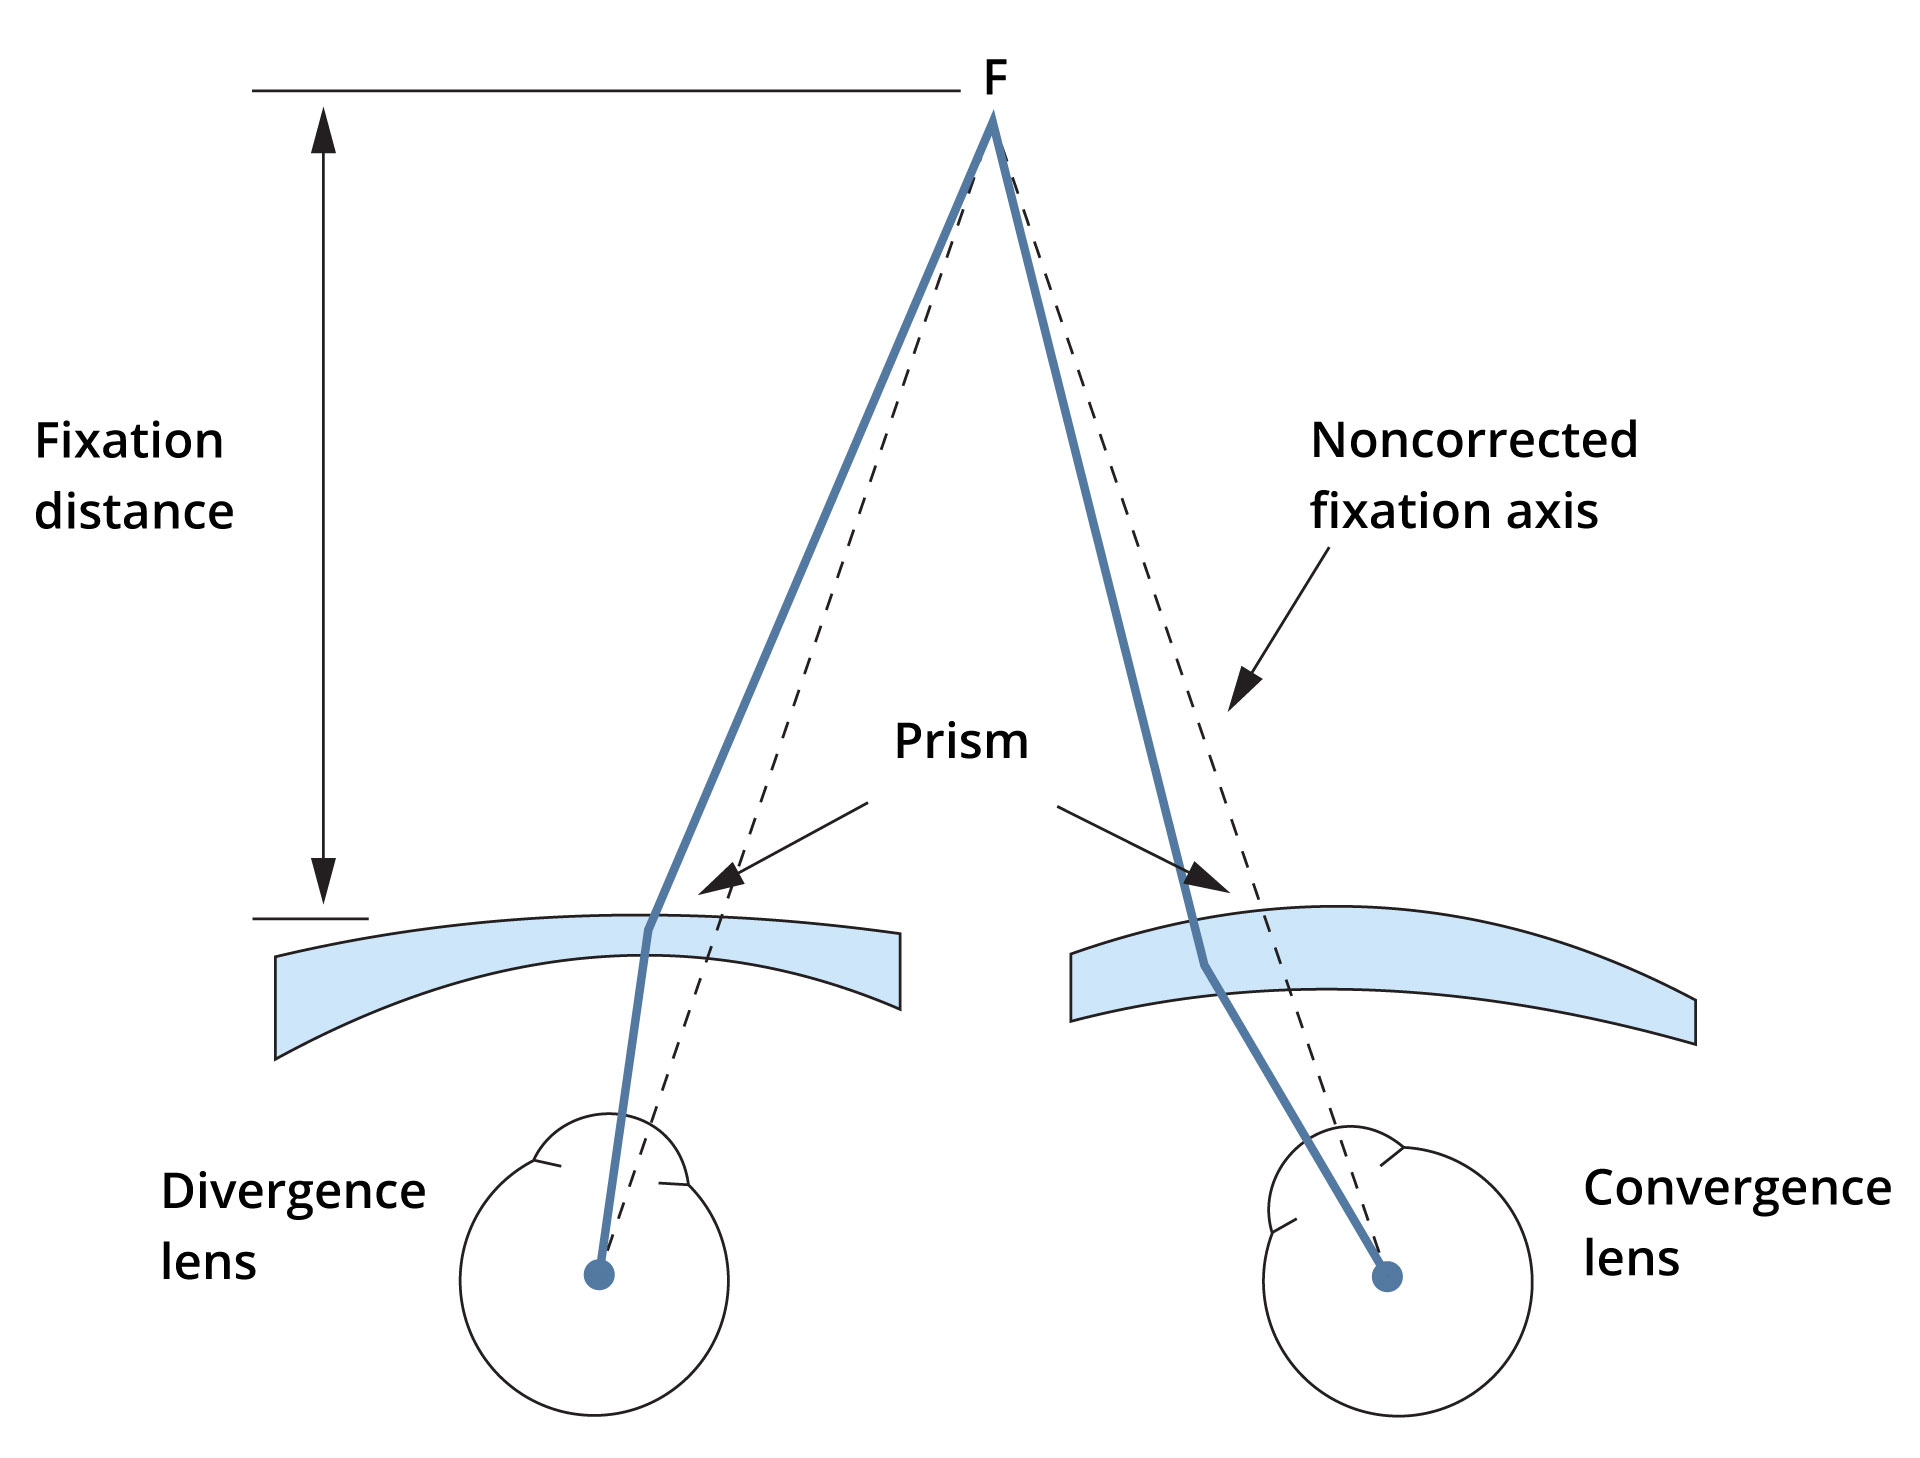 Near convergence demands in convex and concave lens